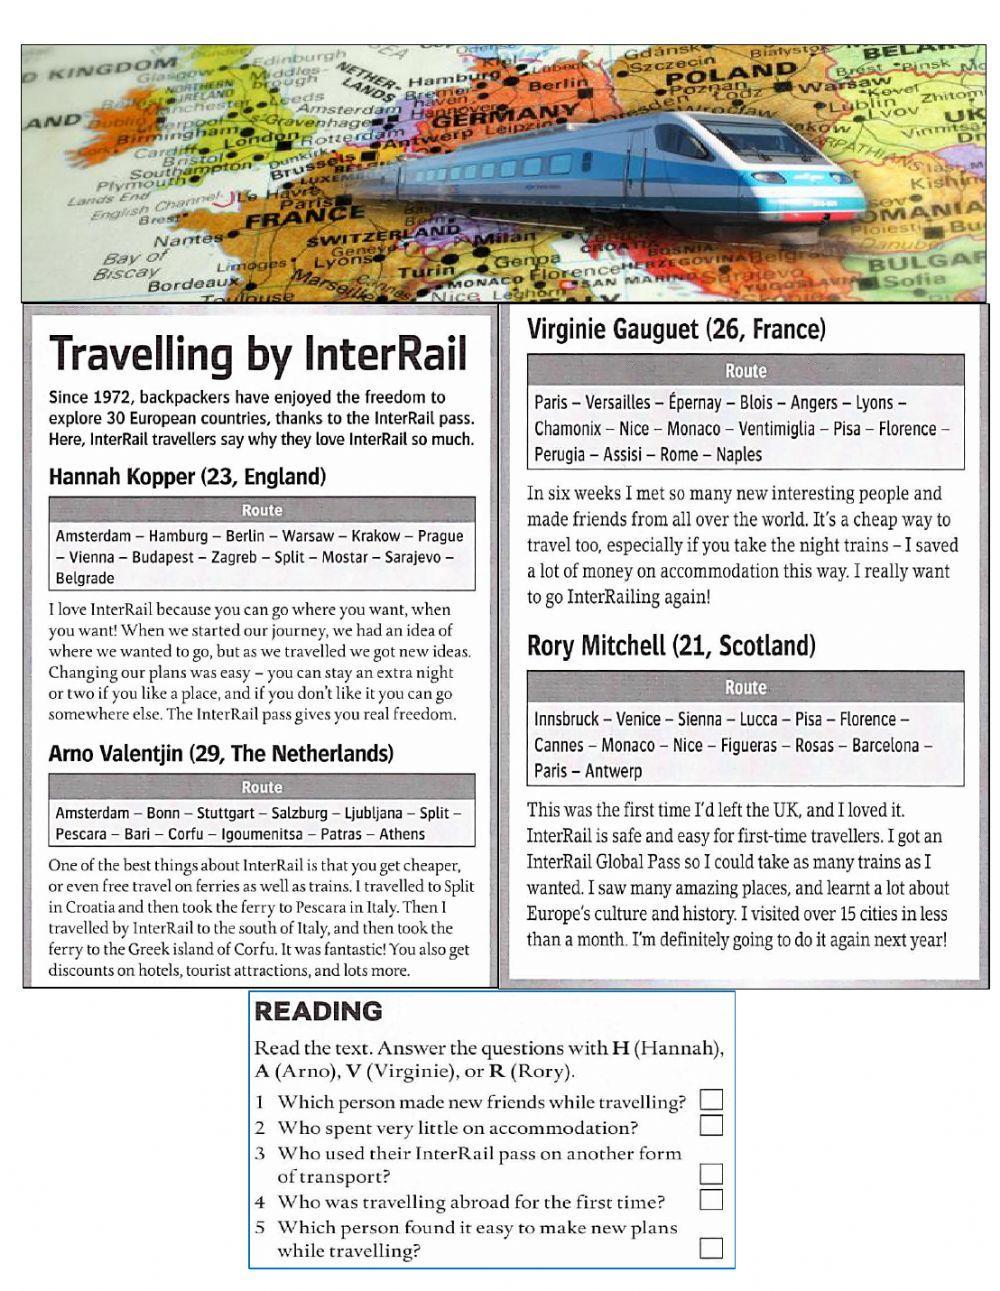 Travelling by InterRail